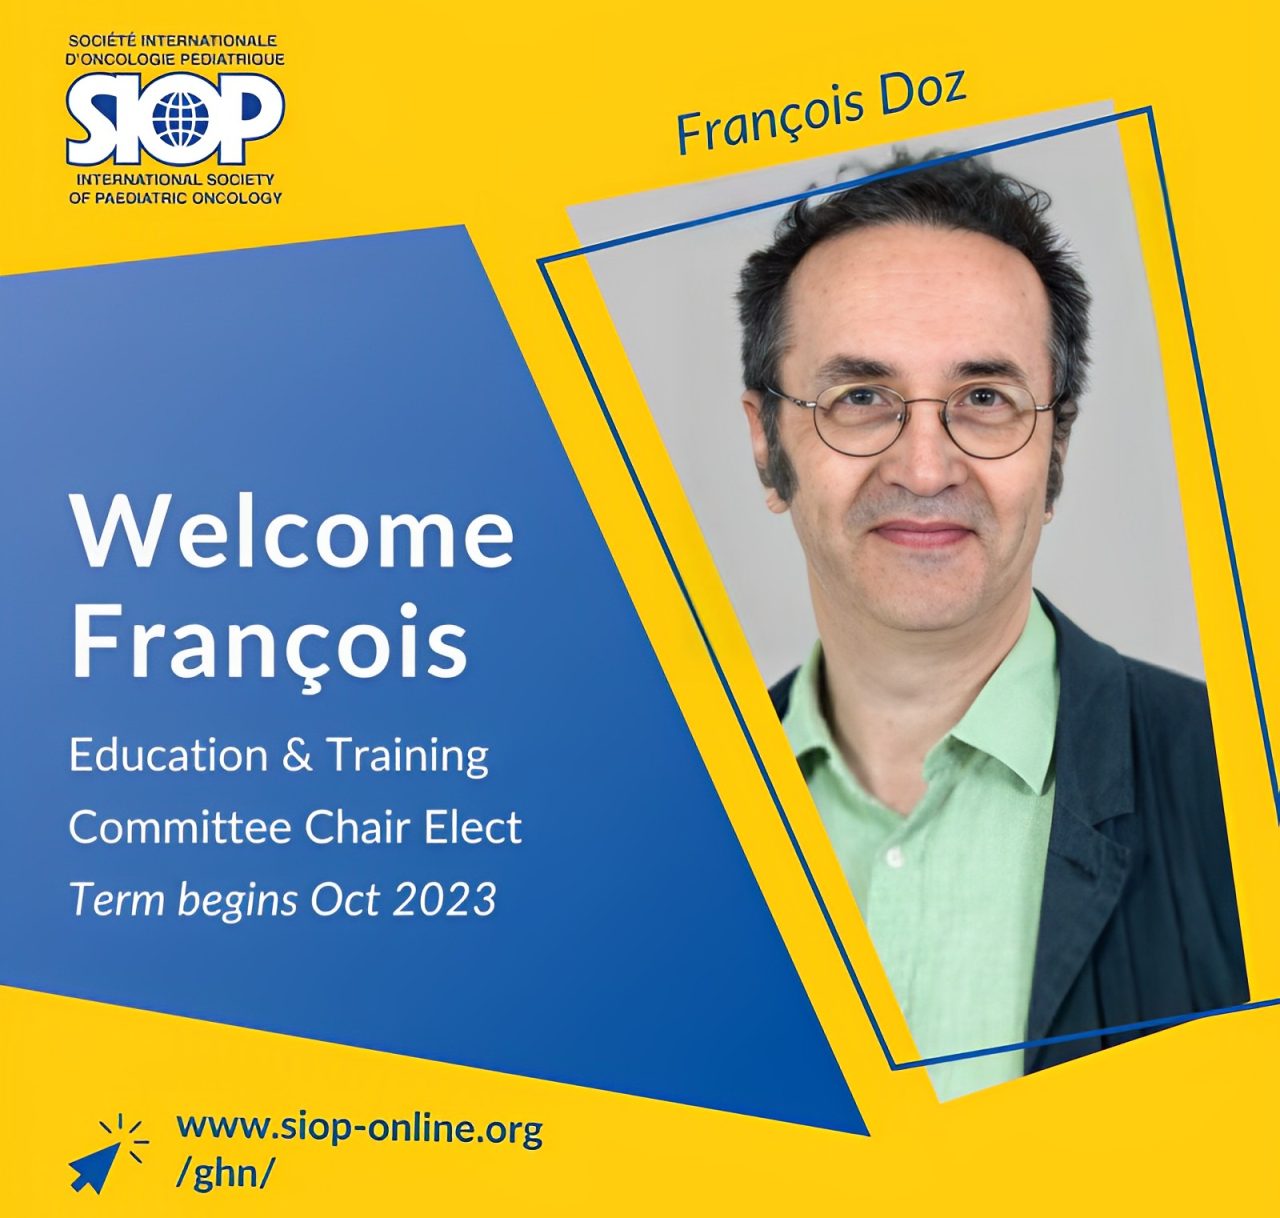 Congratulations to Dr. François Doz on being elected the next Chair of the SIOP Education and Training Committee! – International Society of Paediatric Oncology – SIOP